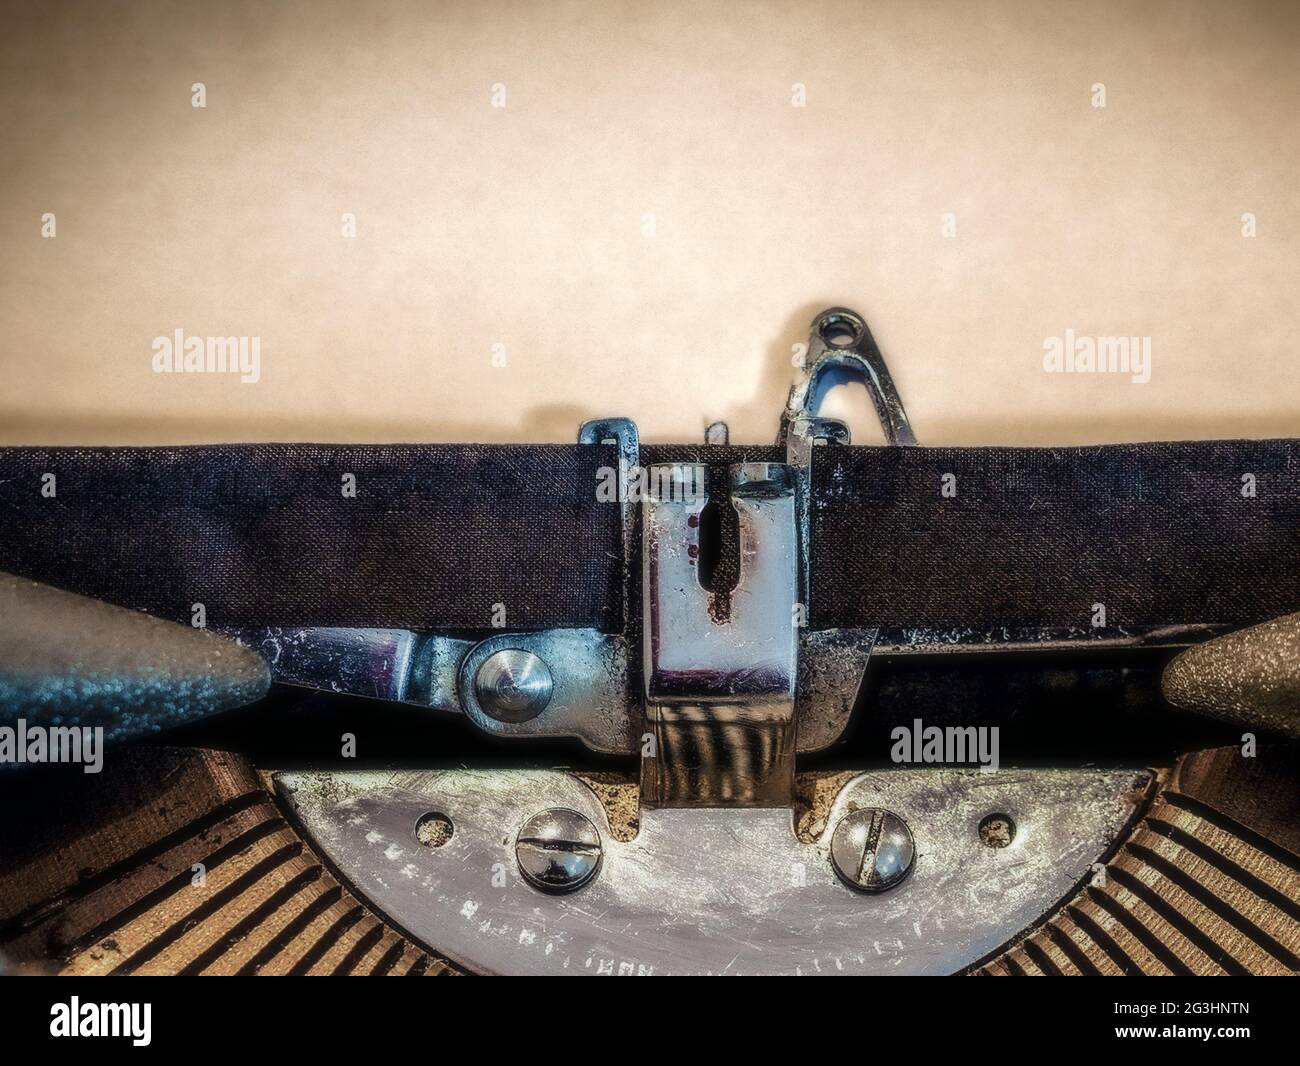 Typewriter close-up with a blank sheet of paper loaded Stock Photo